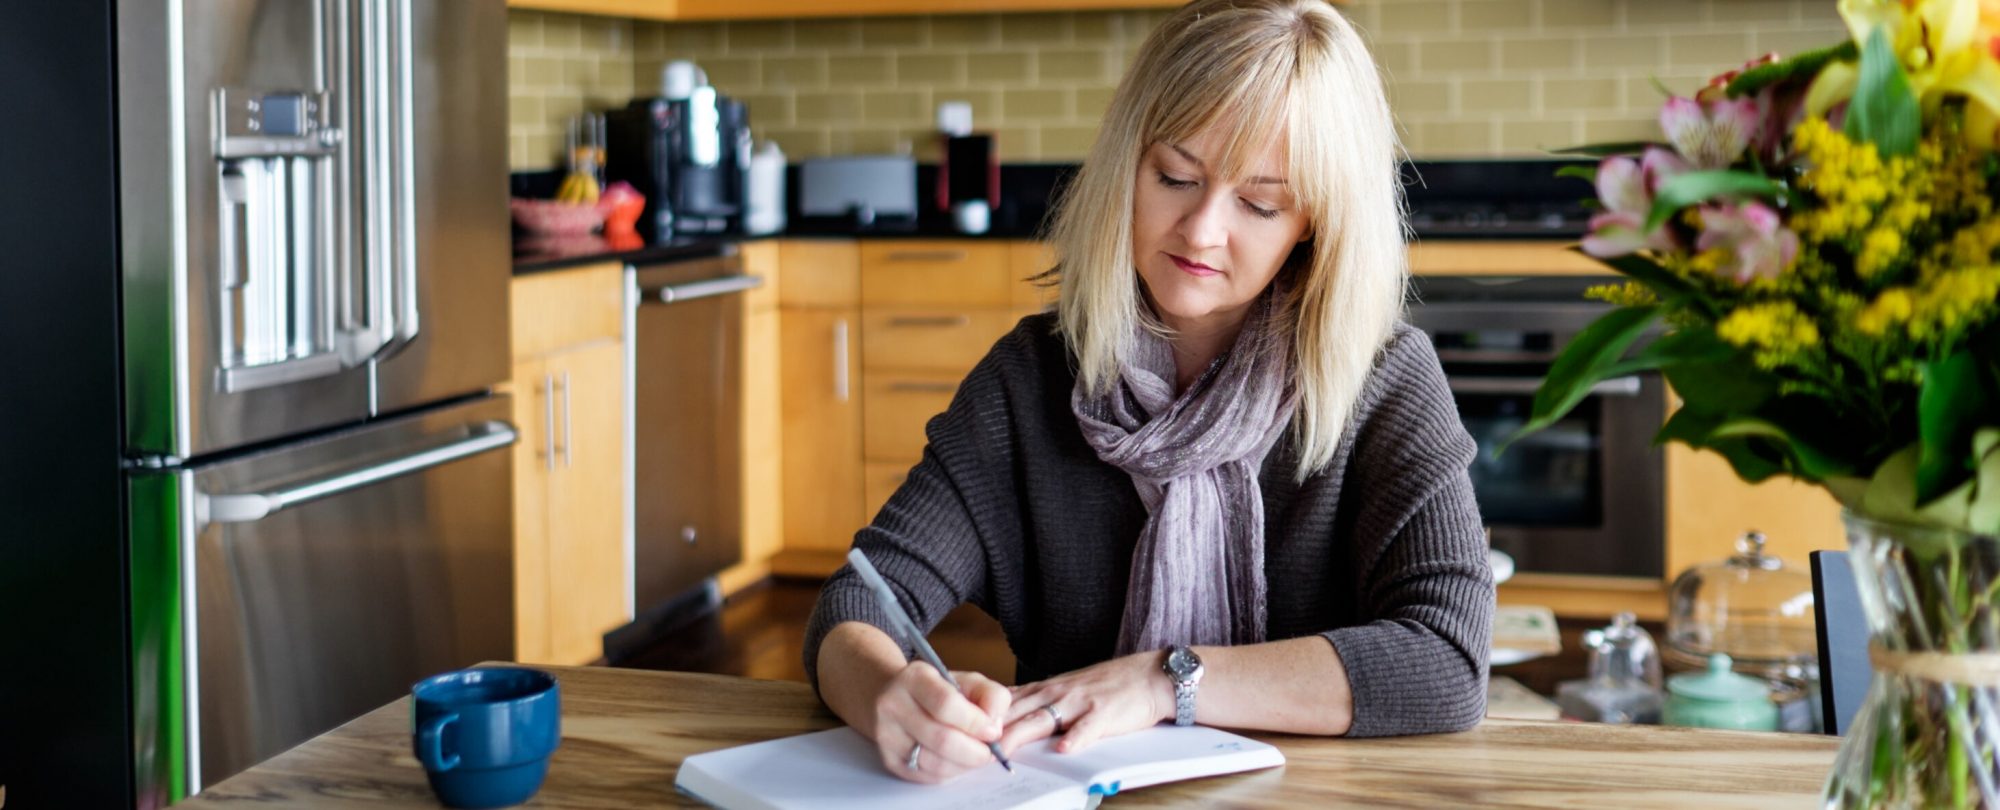 Woman Writing On A Notebook At Home